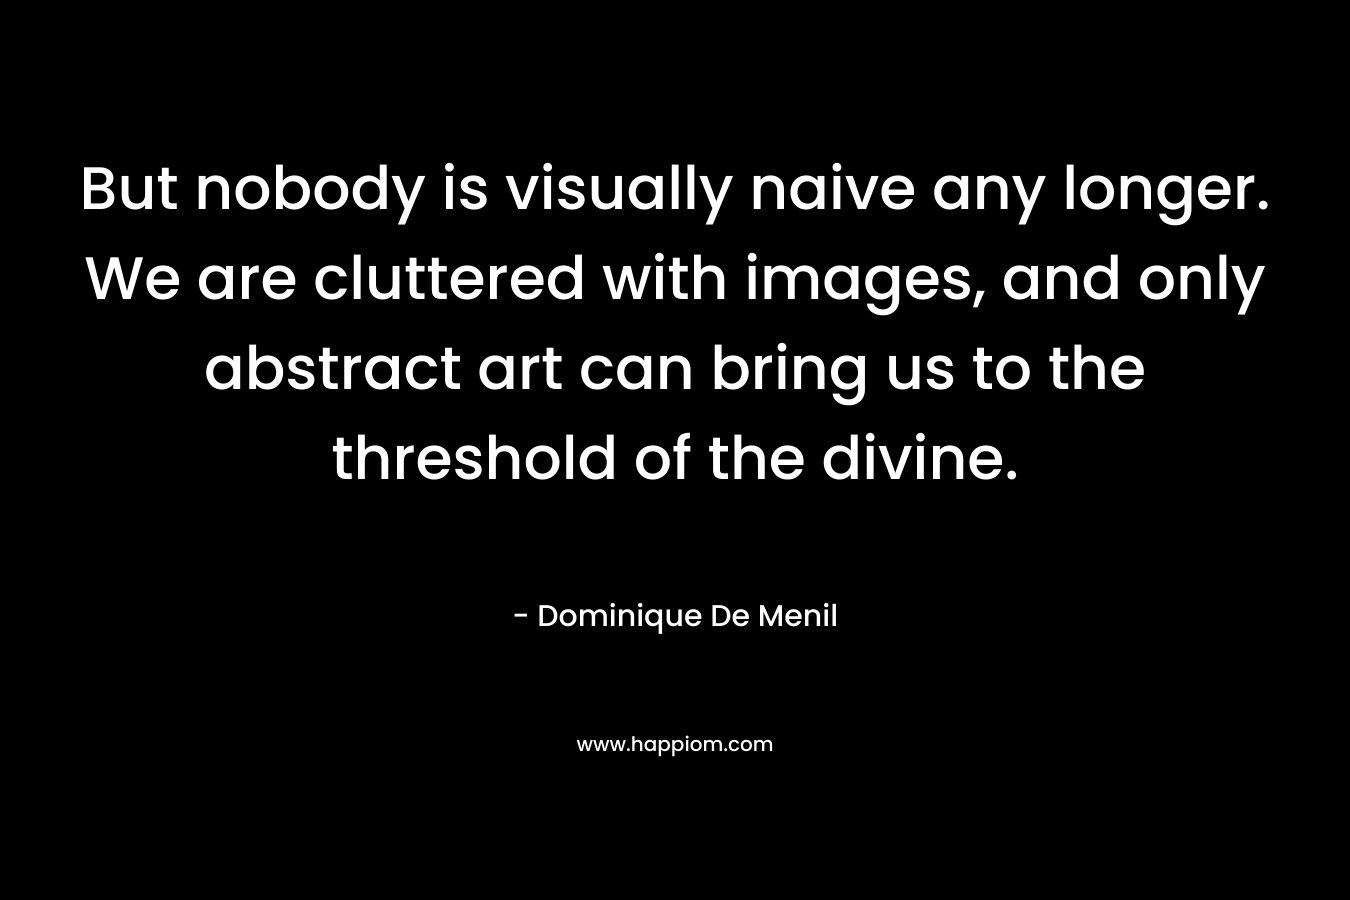 But nobody is visually naive any longer. We are cluttered with images, and only abstract art can bring us to the threshold of the divine. – Dominique De Menil